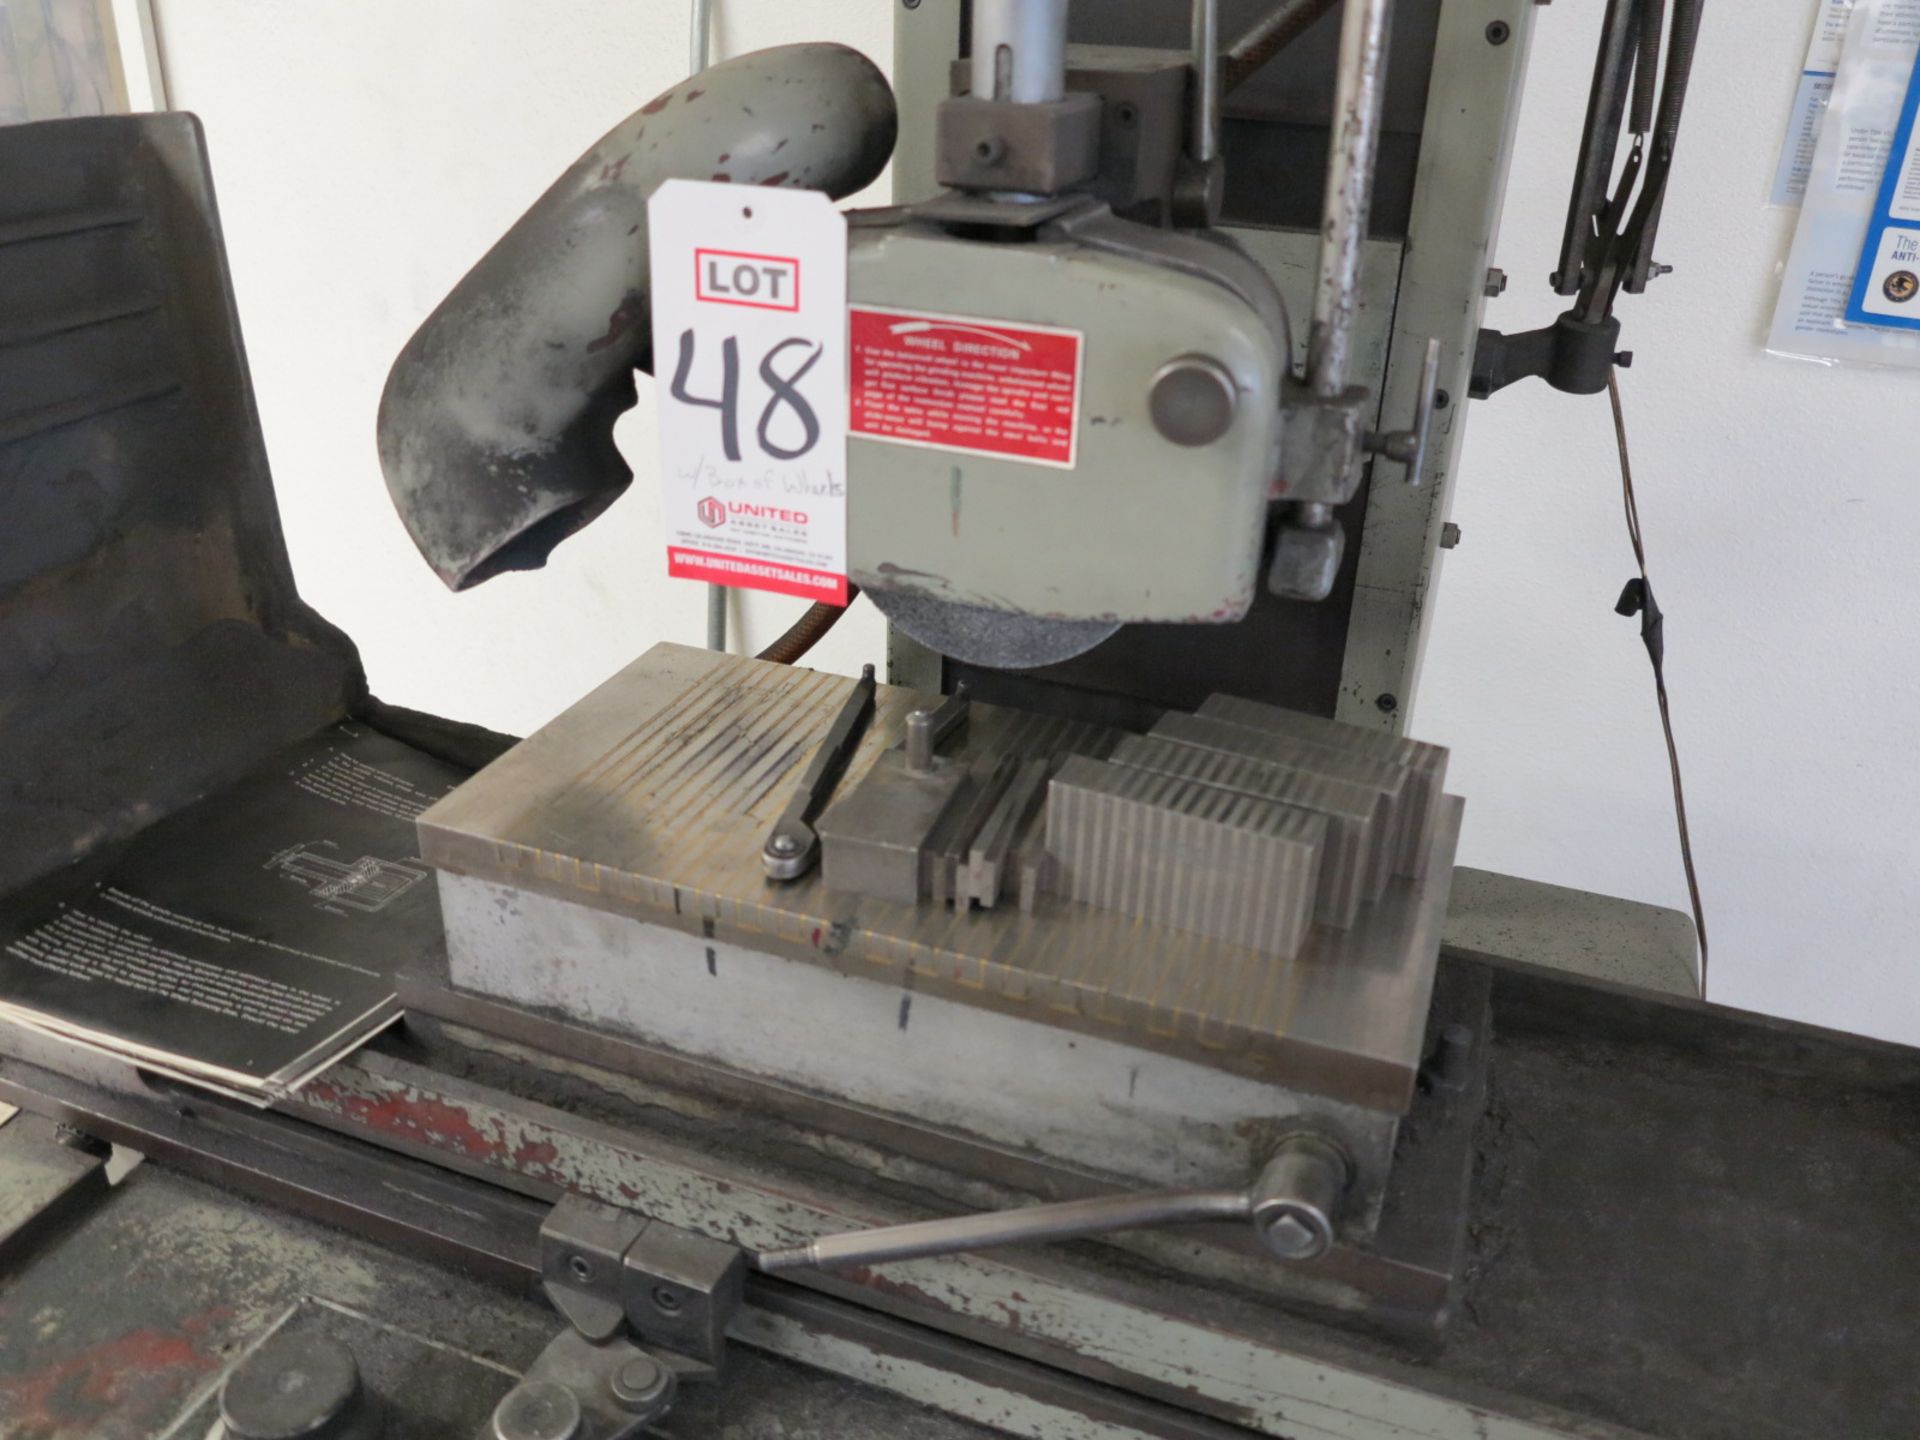 KENT SURFACE GRINDER, MODEL KGS-250H, W/ 8" X 16" MAG CHUCK AND BOX OF GRINDING WHEELS - Image 5 of 6